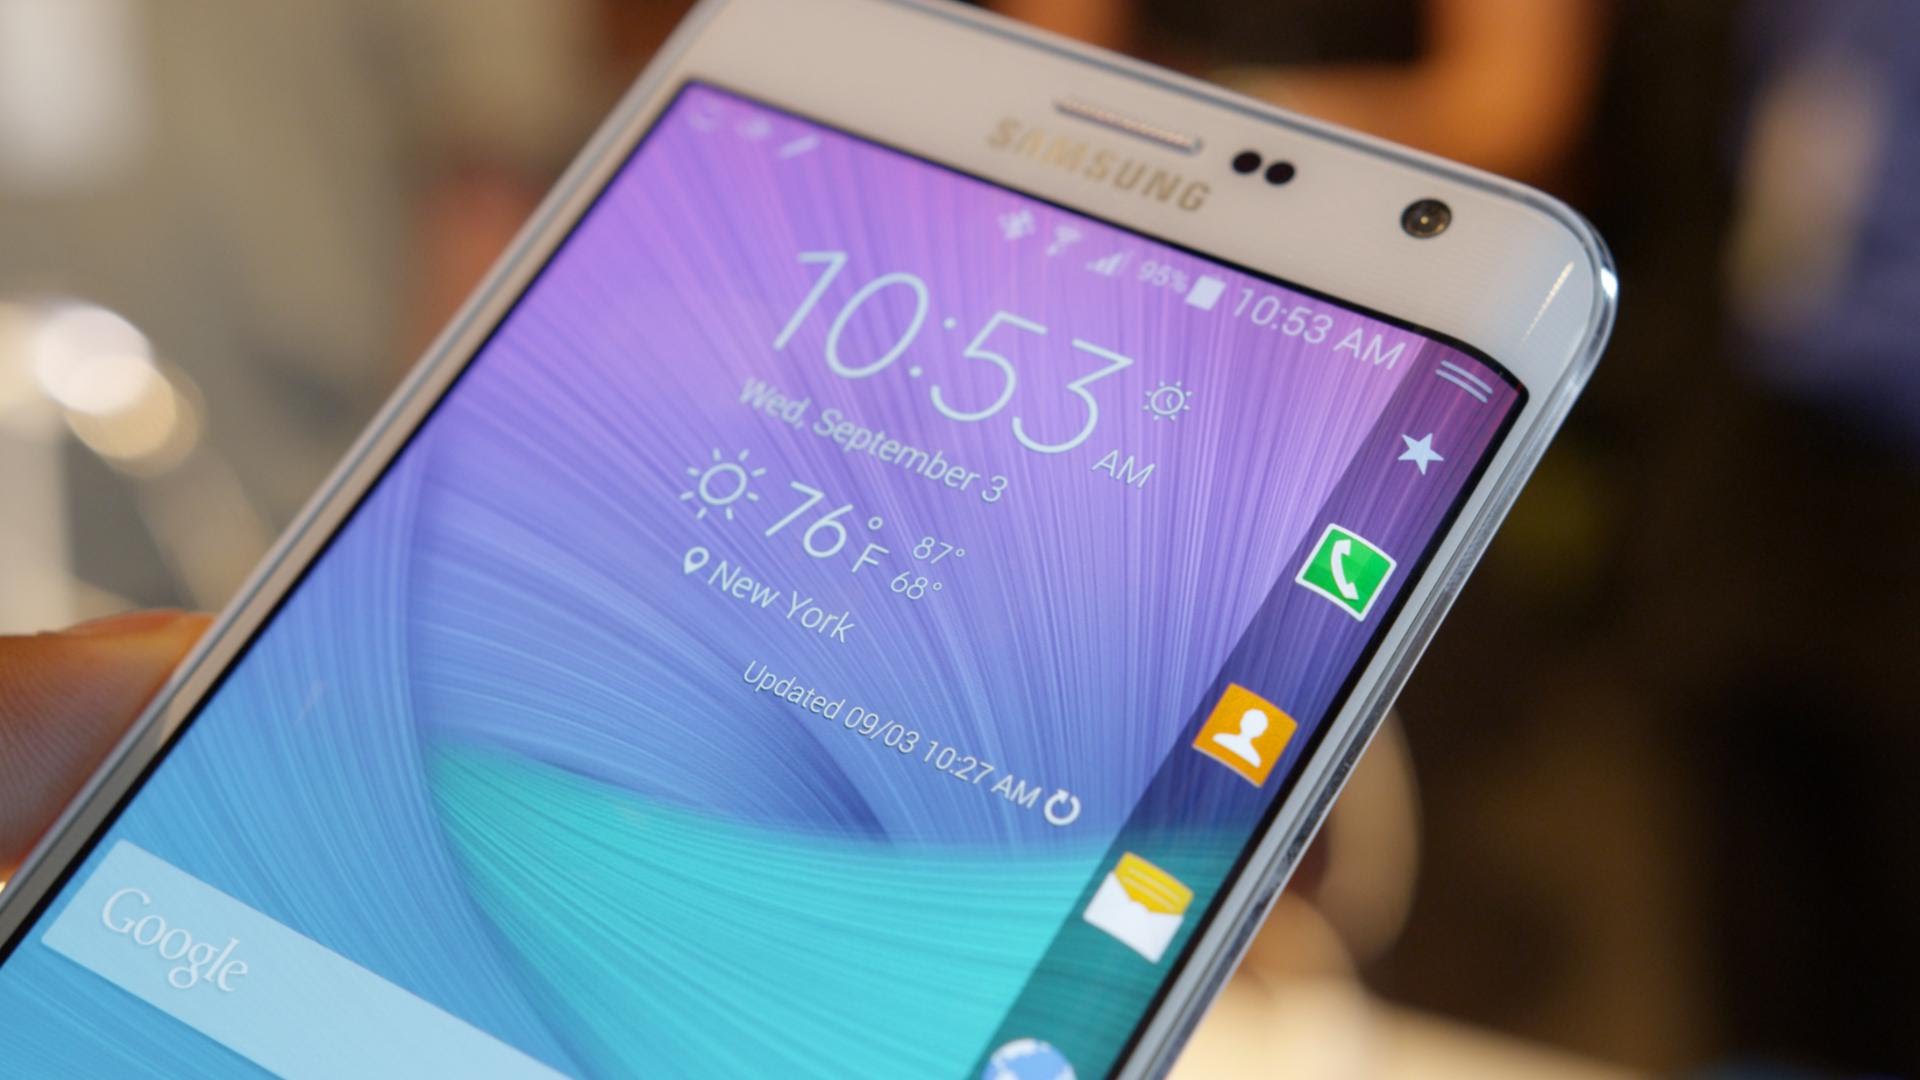 Note 5 launch in mid-august, to avoid overlap with iPhone Launch